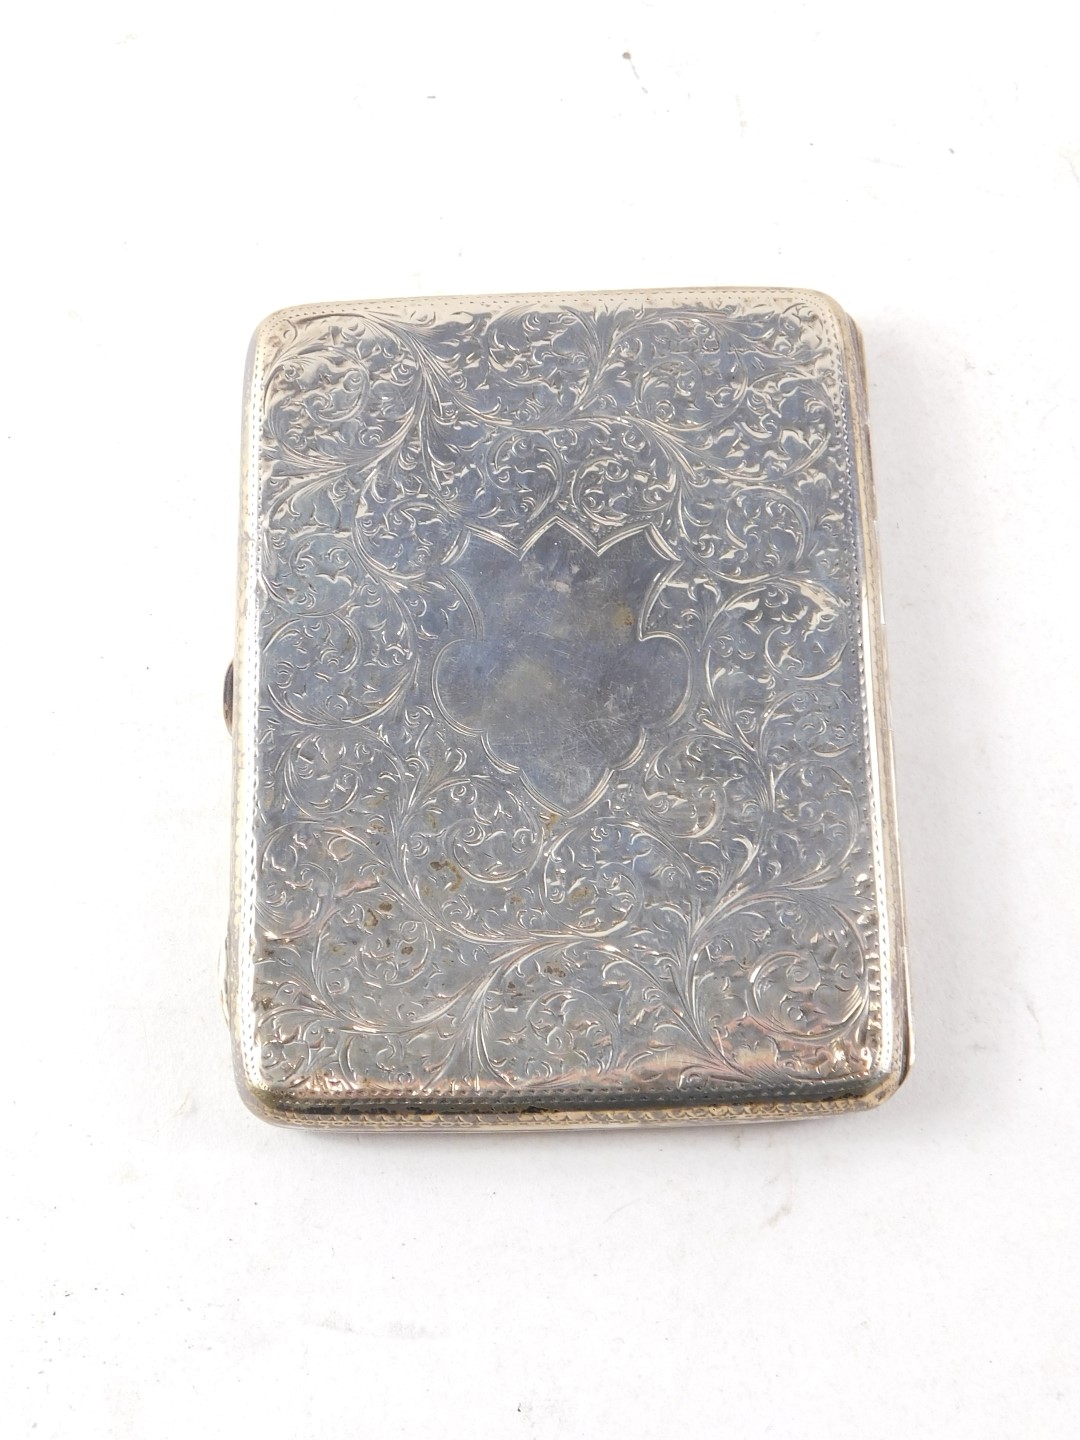 A silver cigarette case, with engraved foliate scroll decoration, hallmarks for Sheffield indistinct - Image 2 of 3